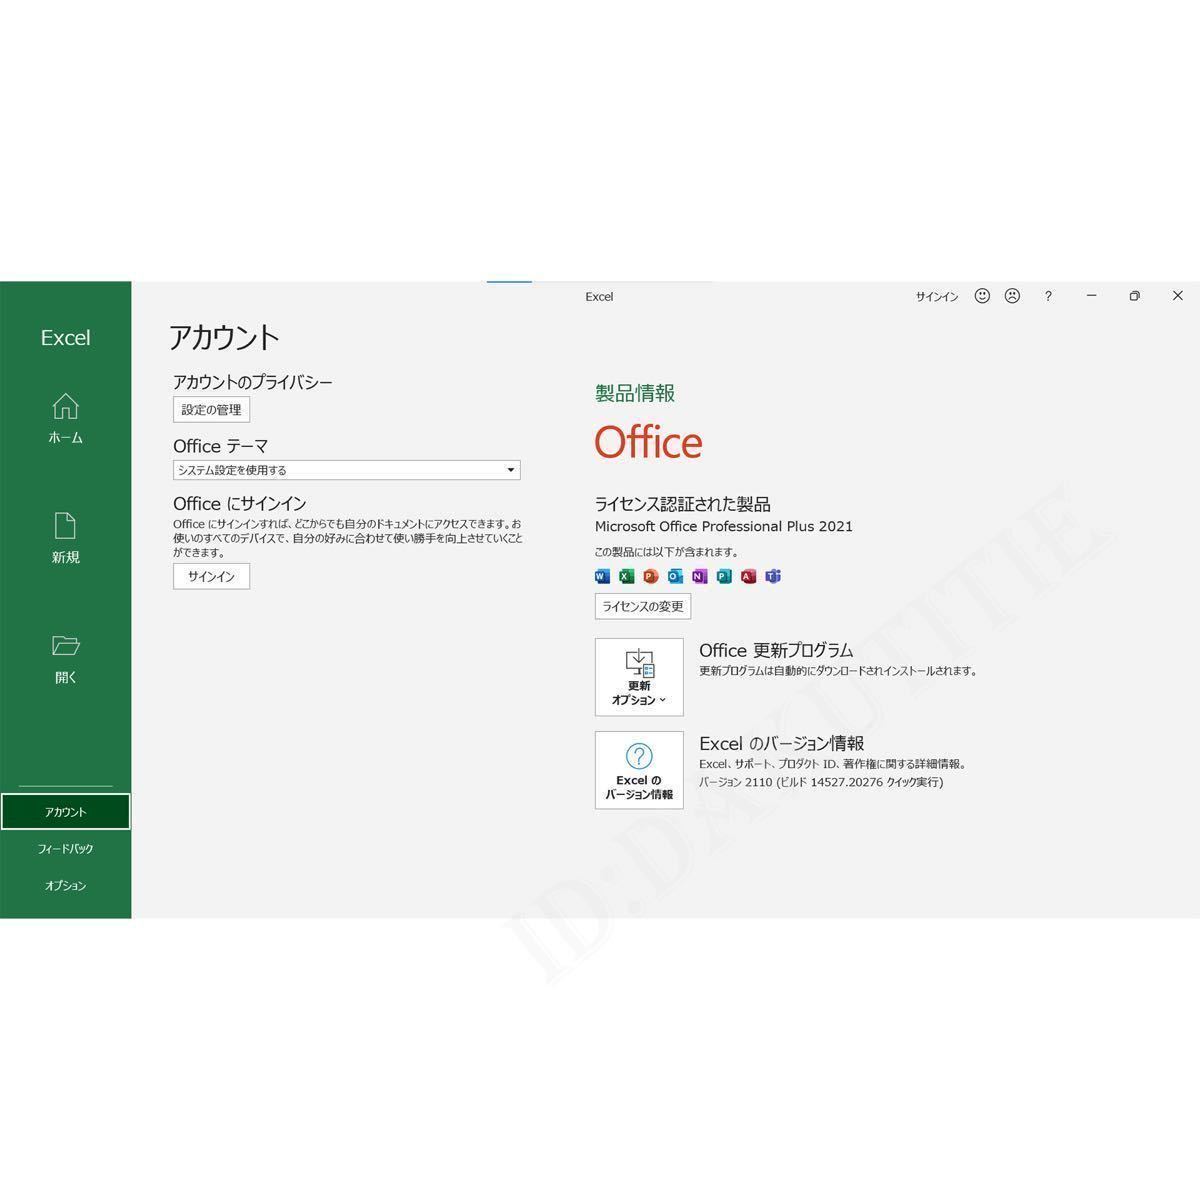 【Office2021 永年正規保証】Microsoft Office 2021 Professional Plus オフィス2021 プロダクトキー Access Word Excel PowerPoin 日本語